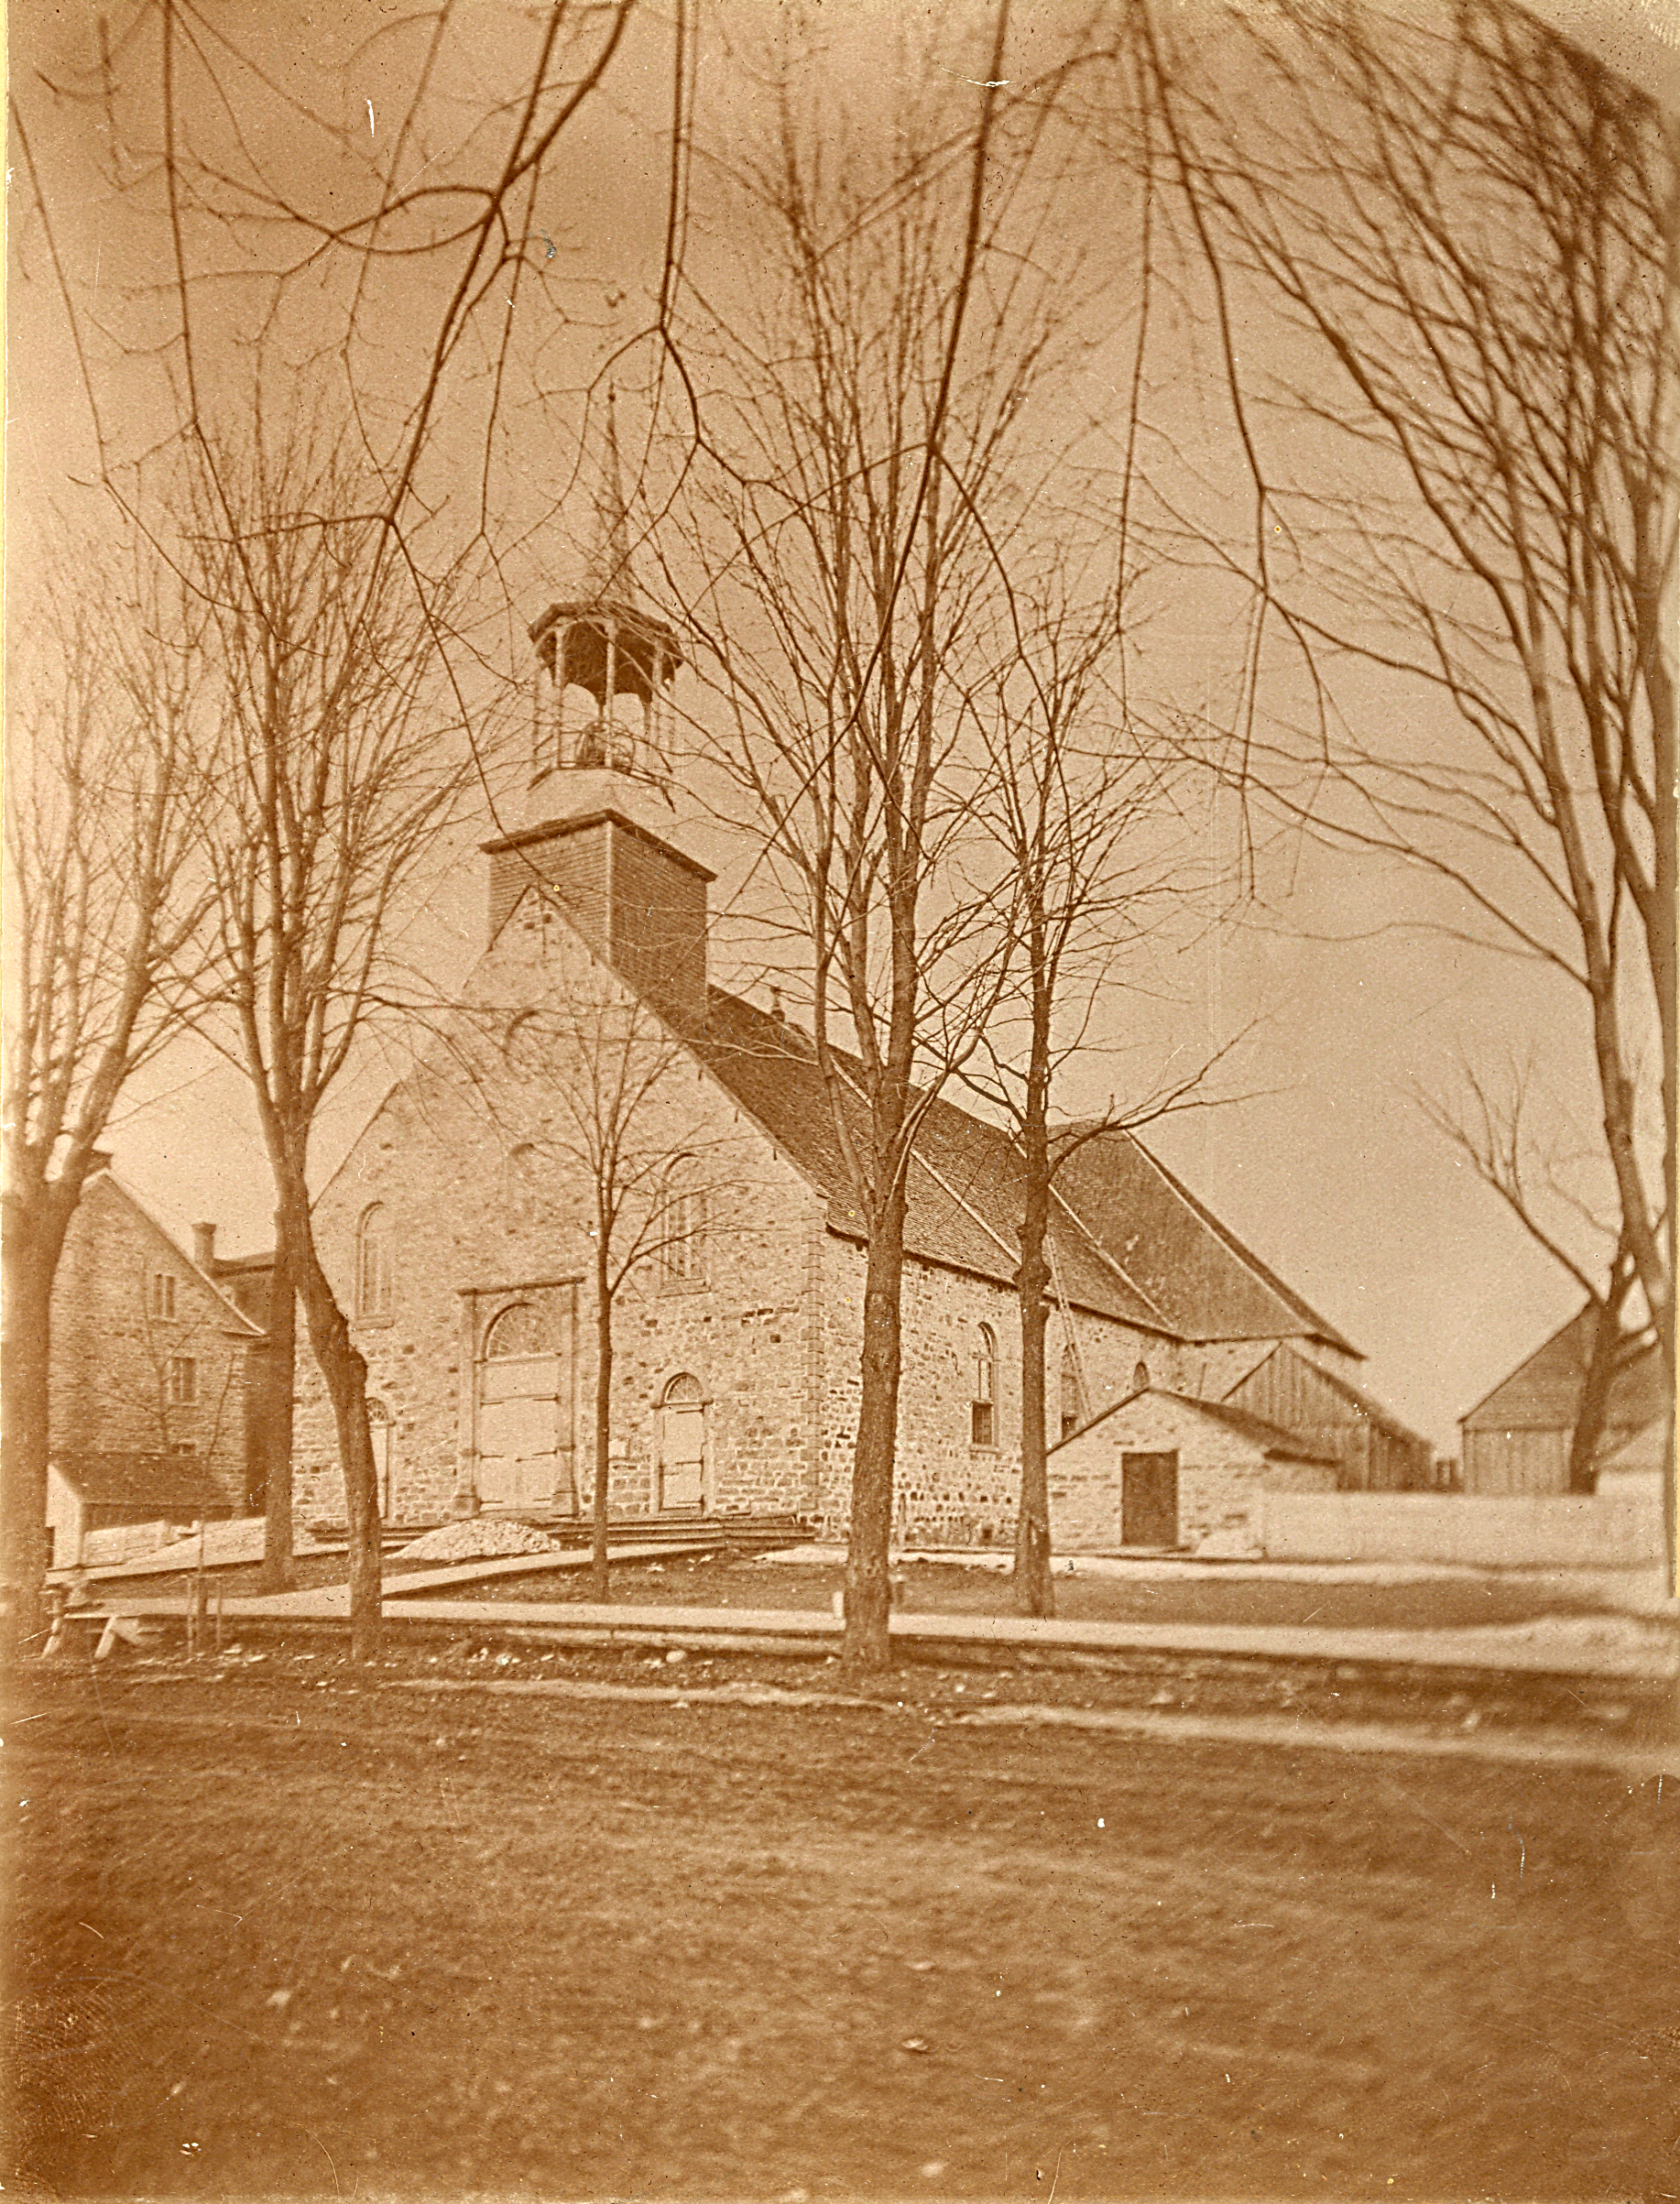 Sepia-tone photograph of the first Church in Saint-Jérôme. The church is built of fieldstone, as is the charnel house, visible to the right. Also seen at right are a number of small farm structures. A wooden sidewalk borders the dirt road in the foreground.